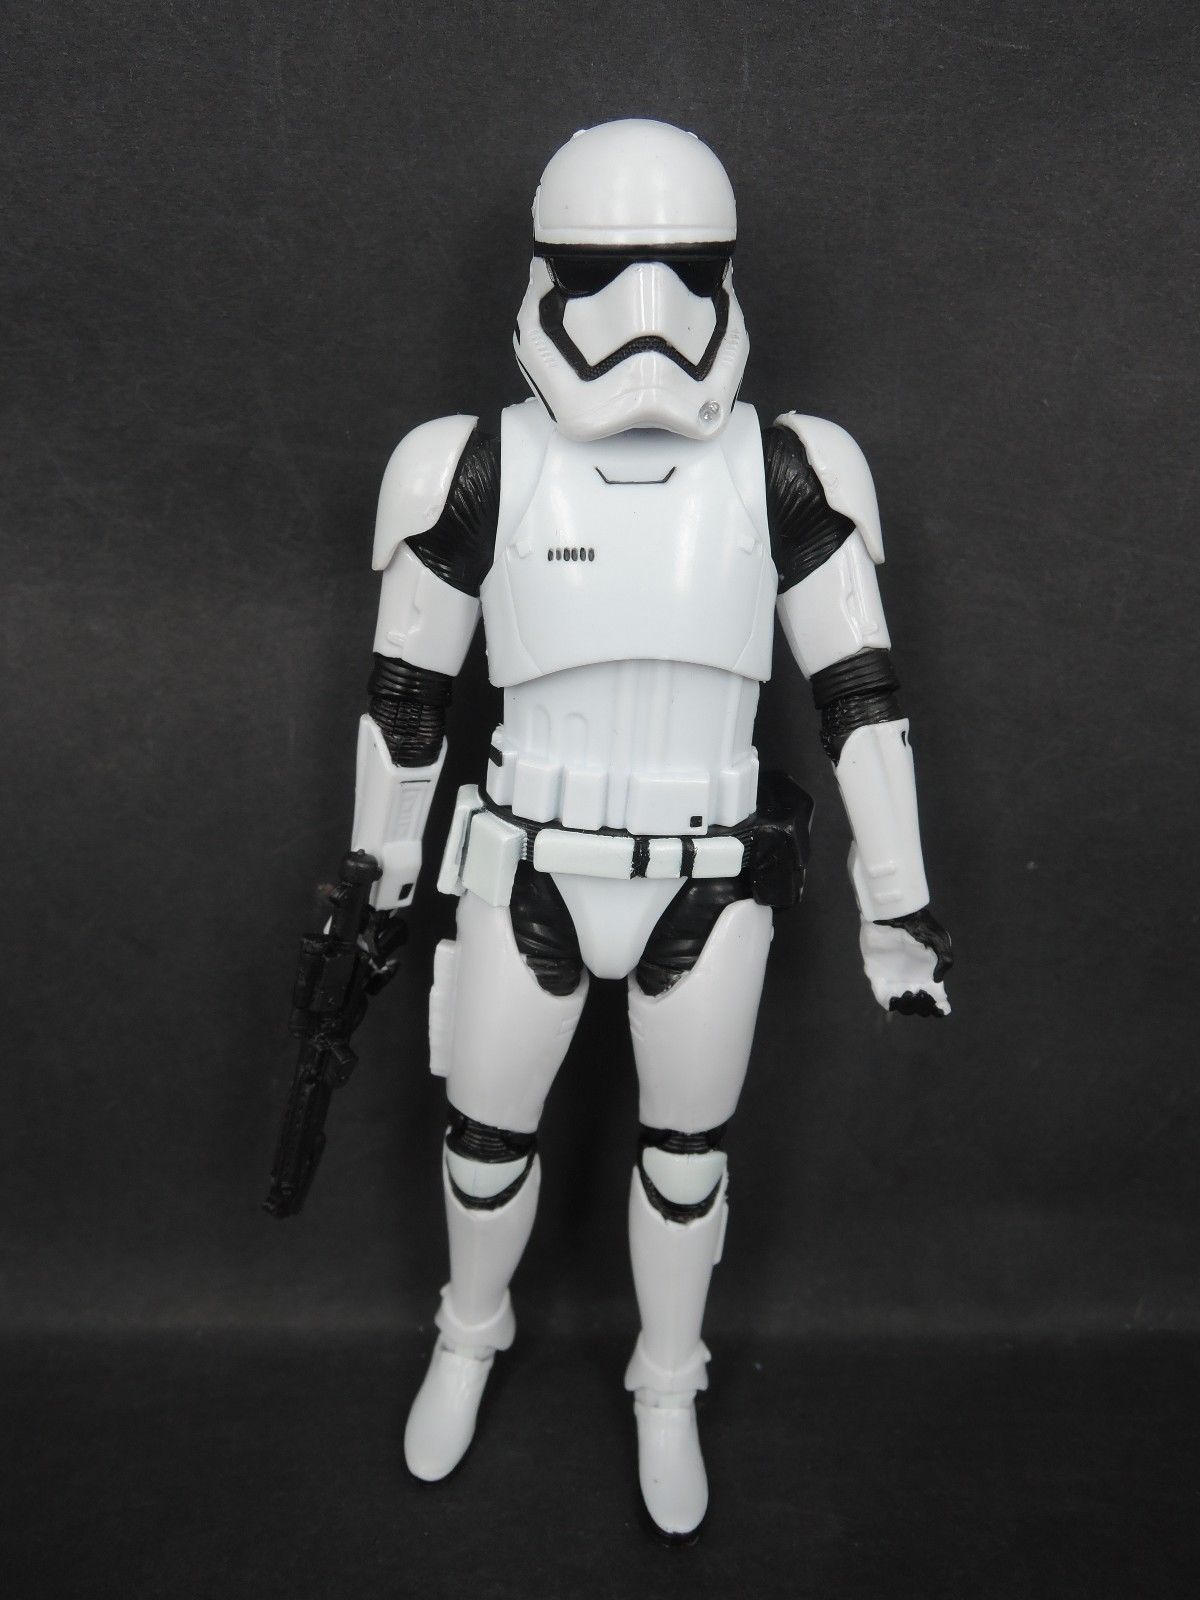 http://www.starwars-universe.com/images/actualites/collection/hasbro/stormtrooper-tfa-01.jpg